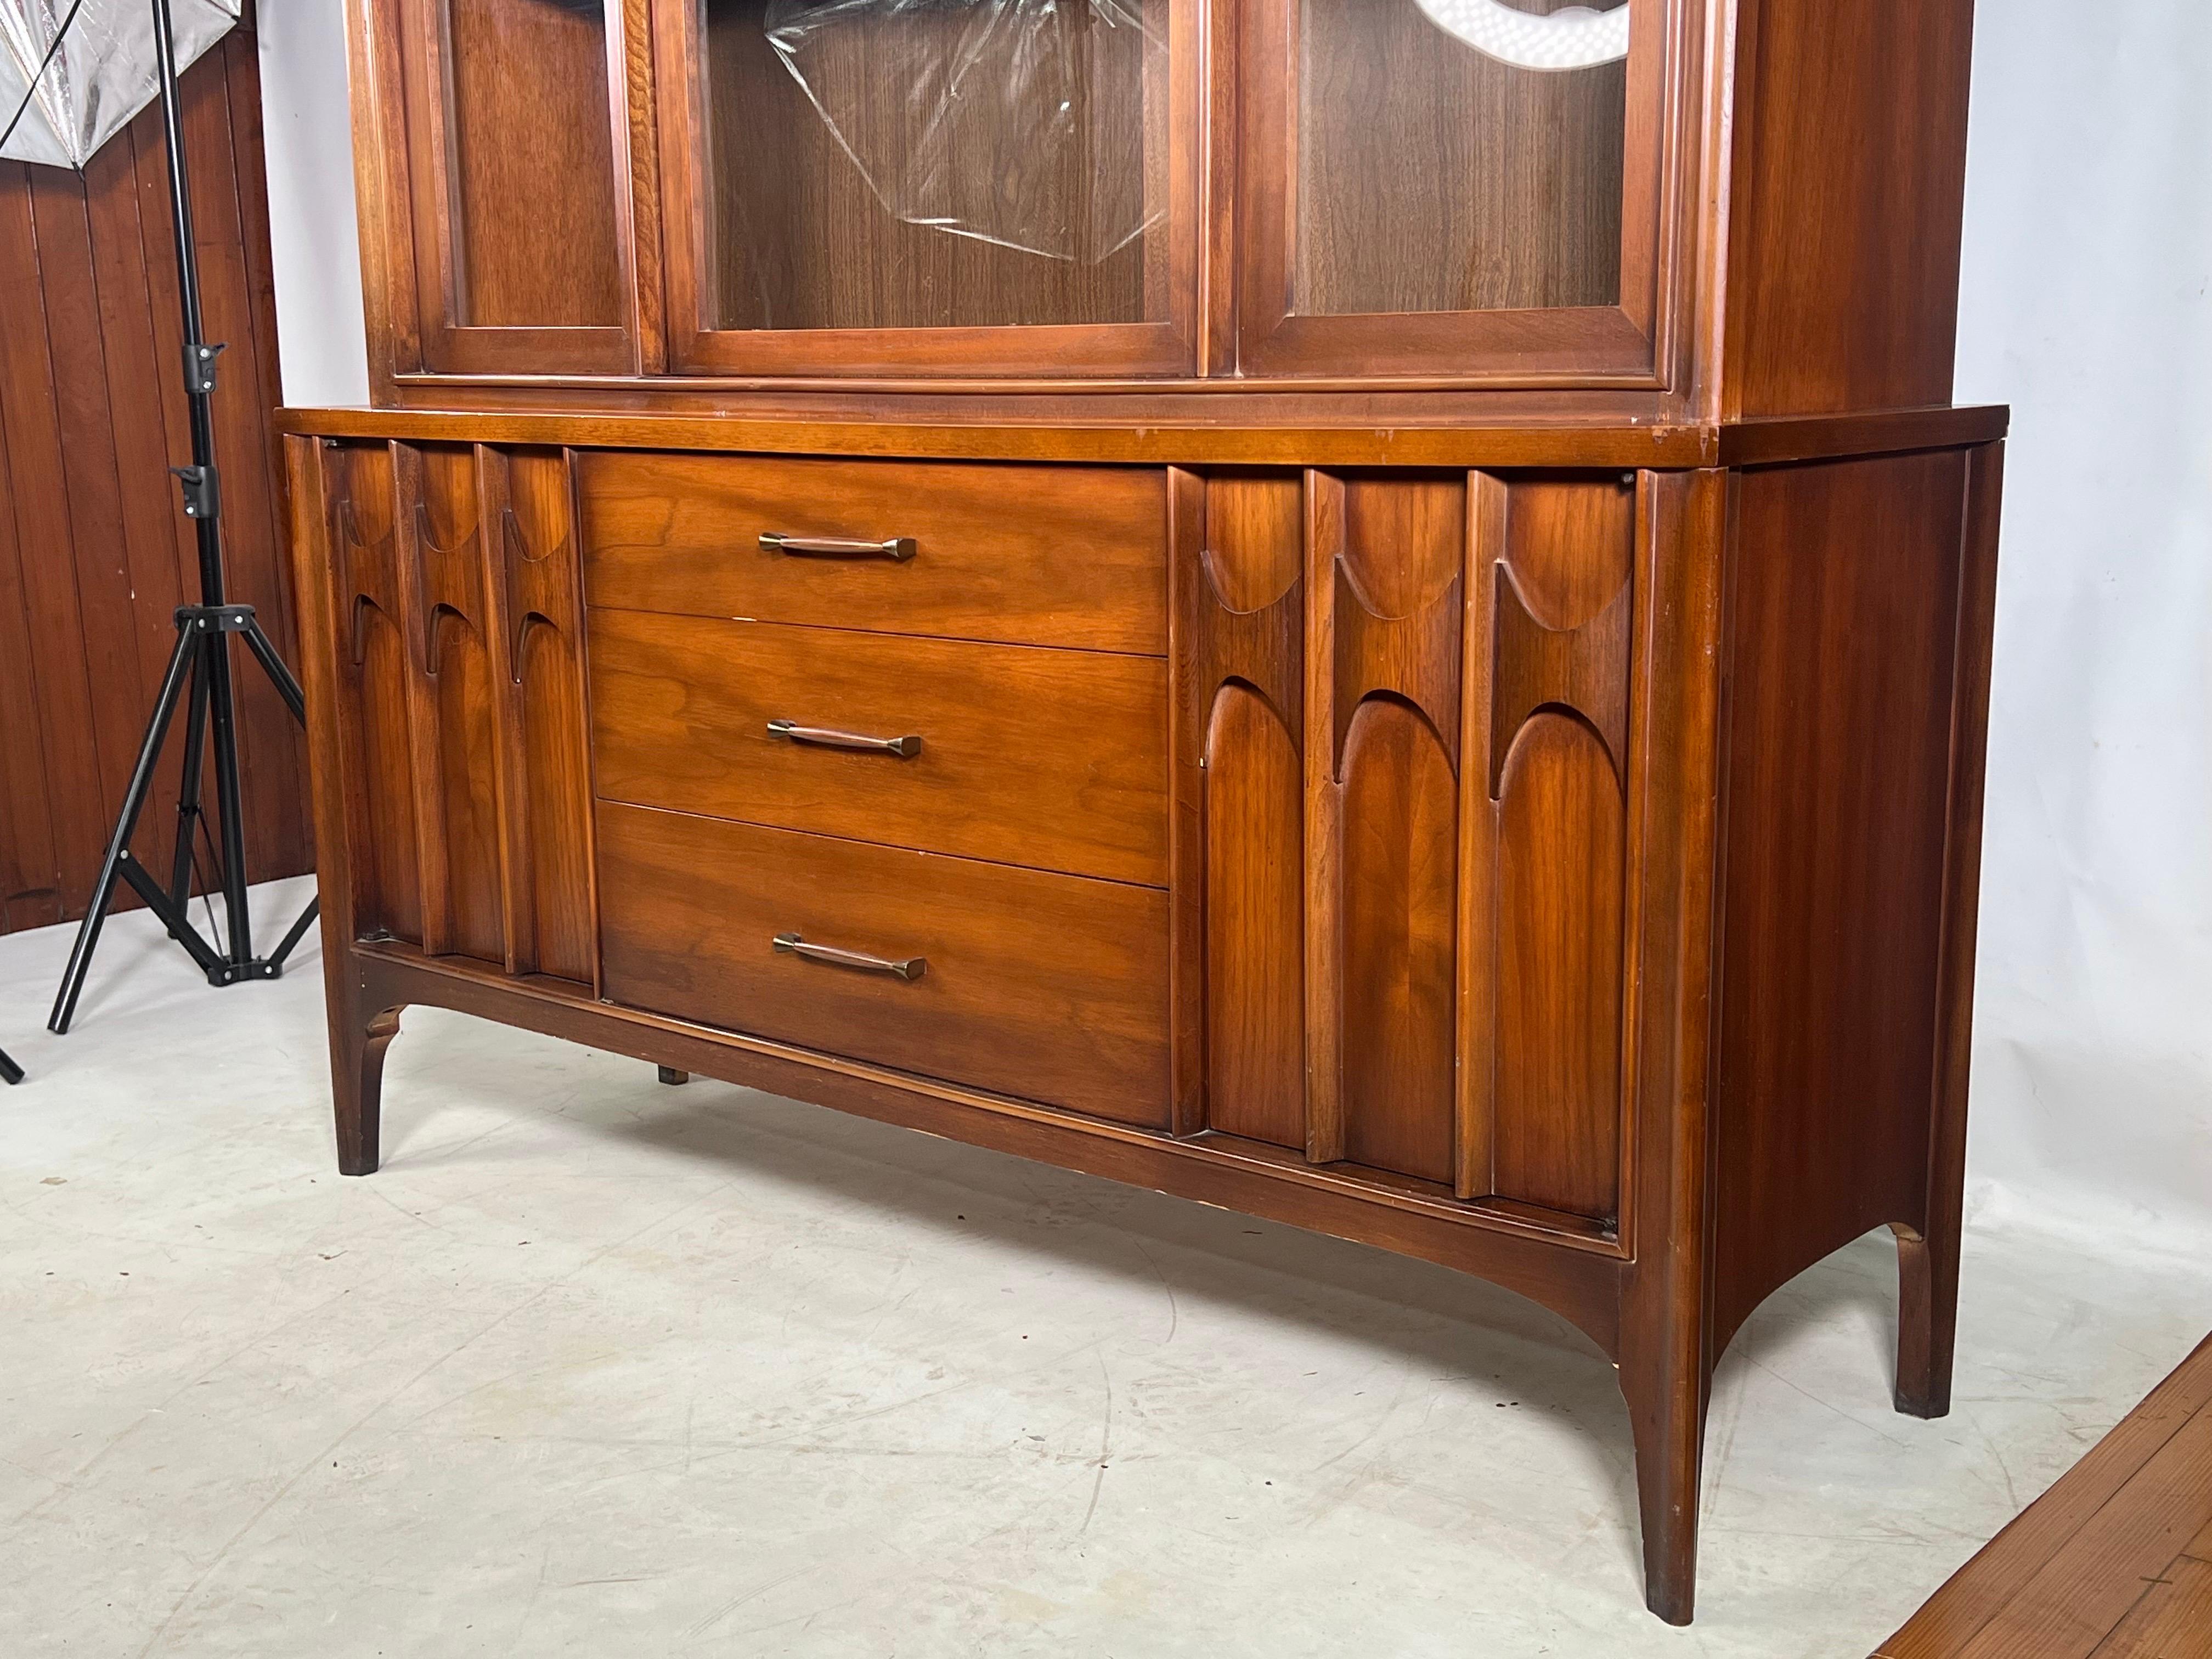 Very nice original Kent Coffey Perspecta hutch that is made out of walnut and rosewood.